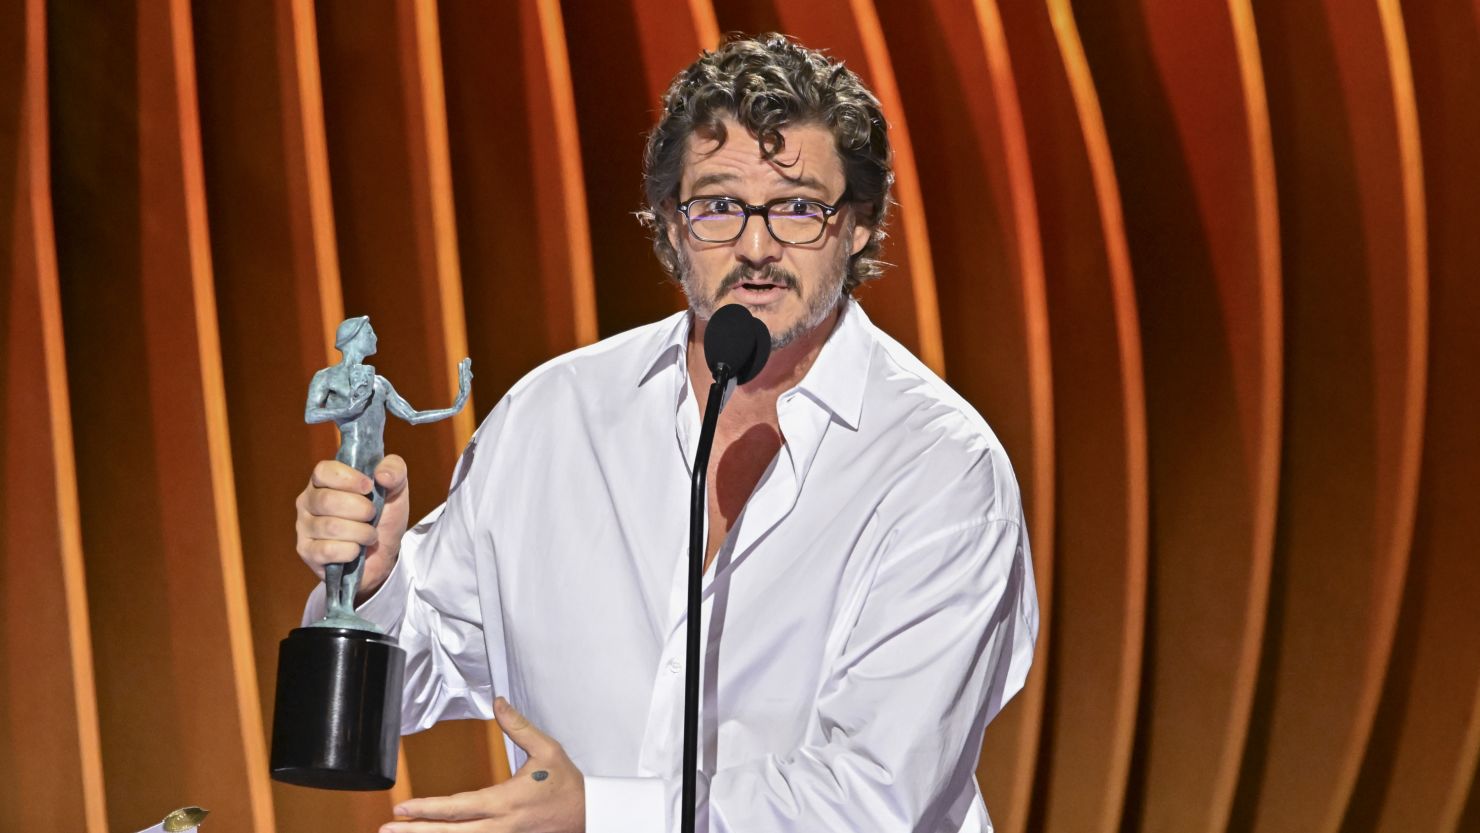 Pedro Pascal said he was ‘a little drunk’ while accepting SAG Award for